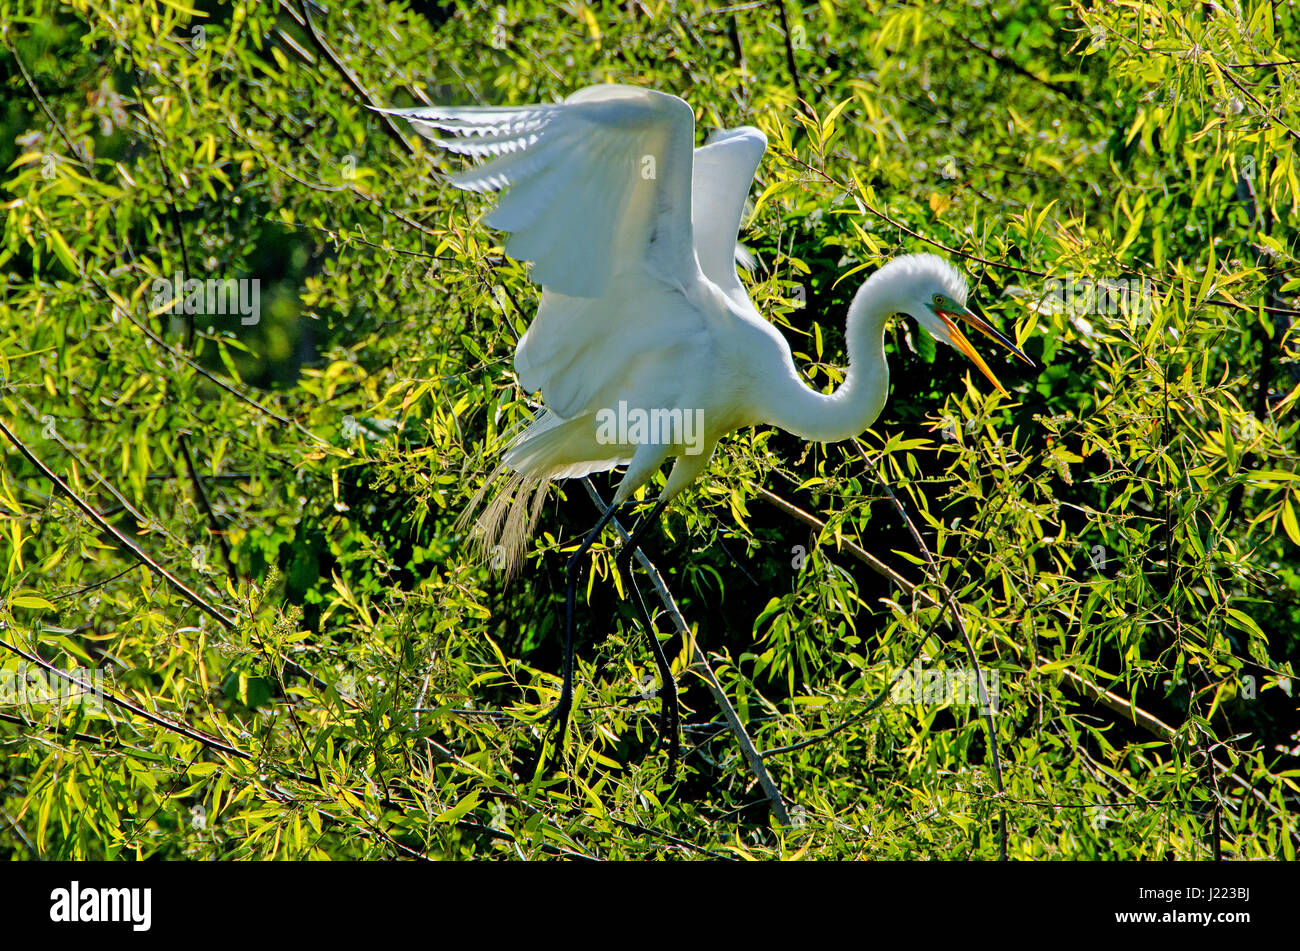 Great white egret chases away intruder near its nest in rookery on Hilton Head Island, South Carolina. Stock Photo